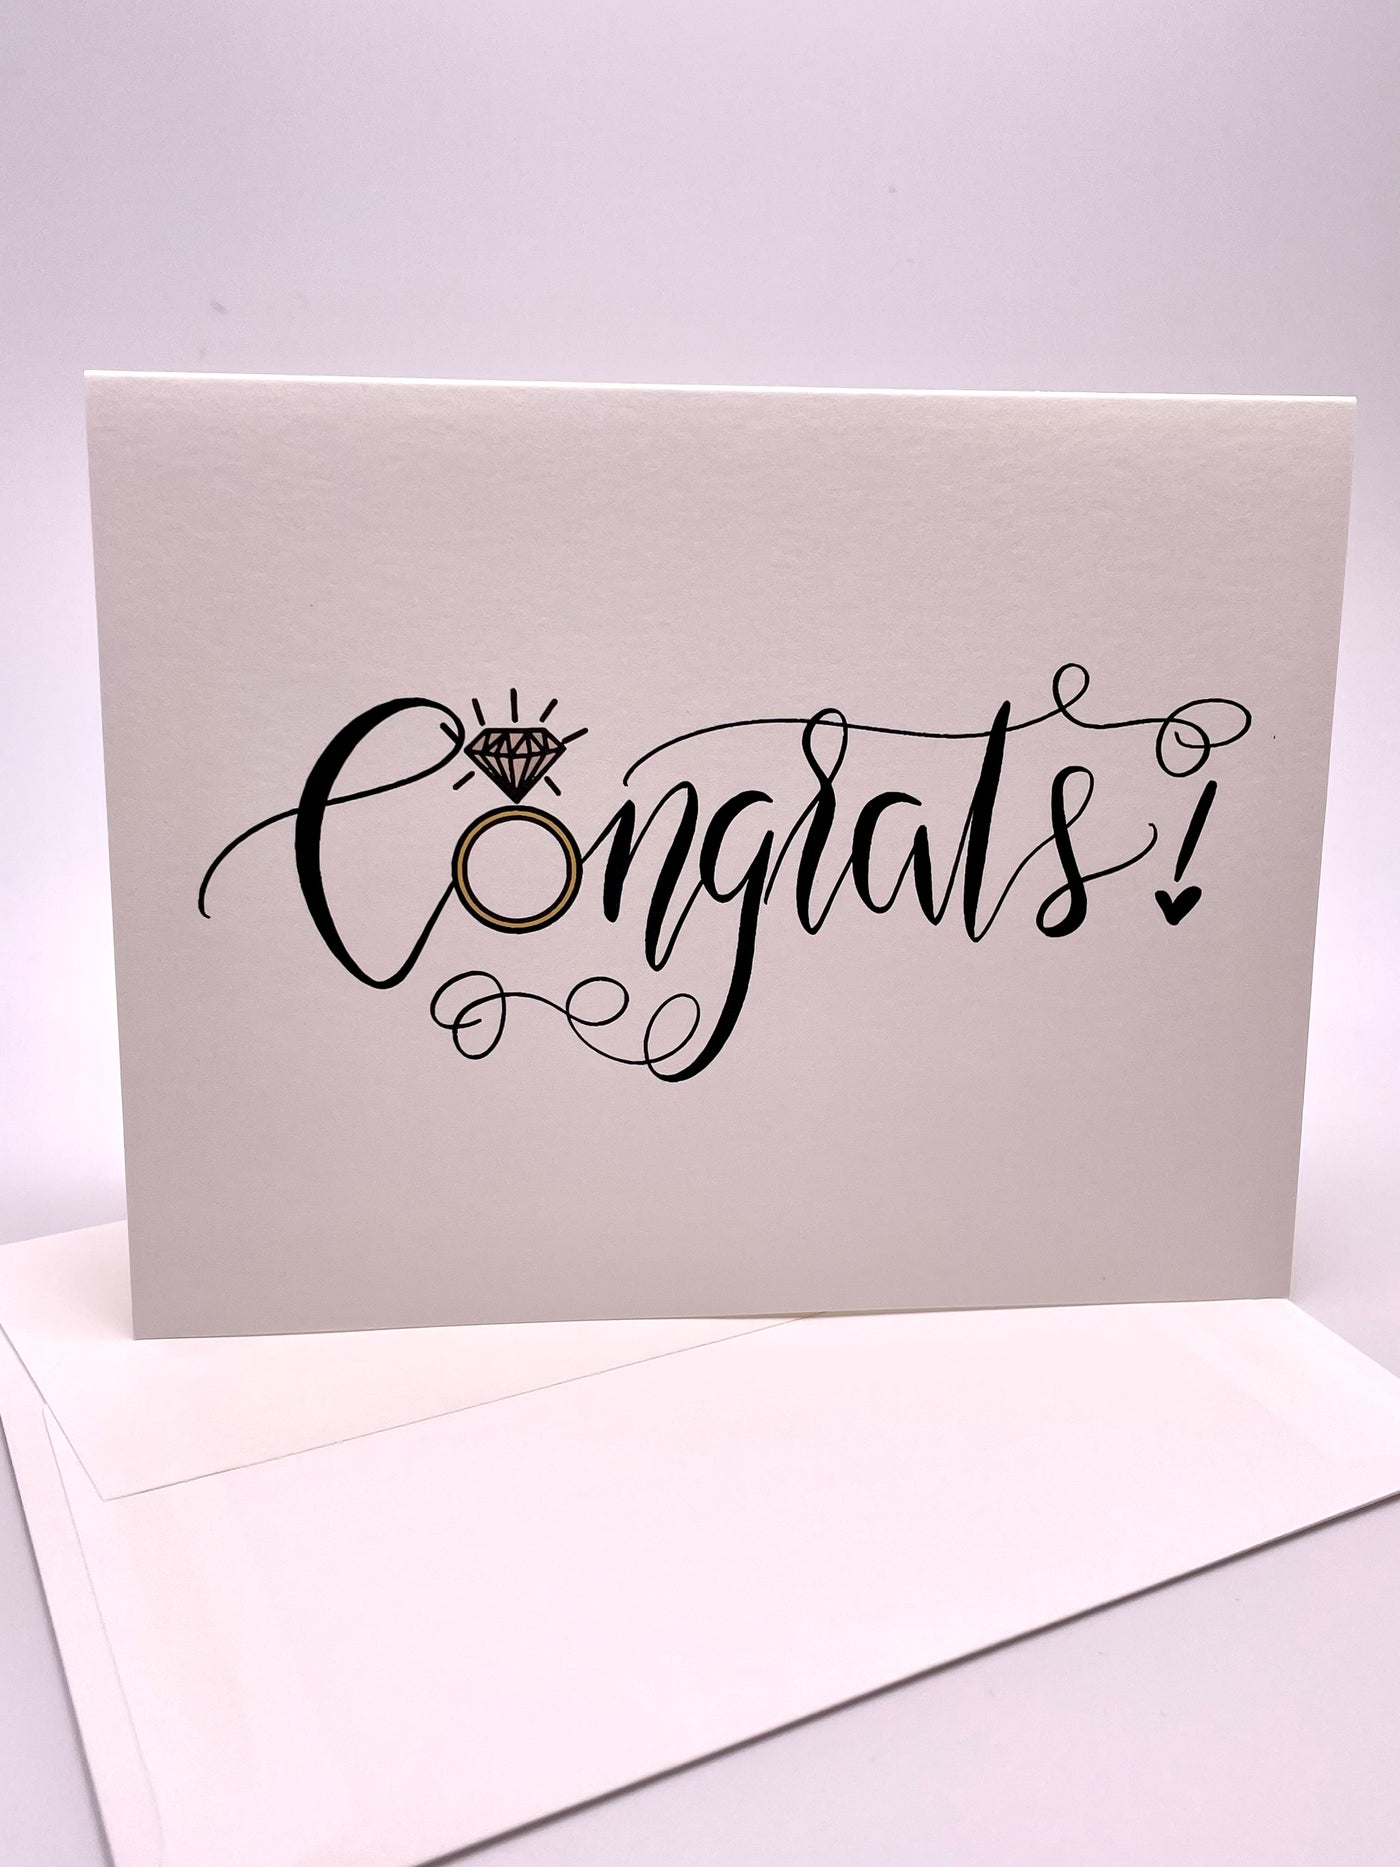 Latinx small woman owned business card that says Congrats! for an engagement or wedding Latinx owned business engagement bridal bride shower congratulations ring wedding gift for her